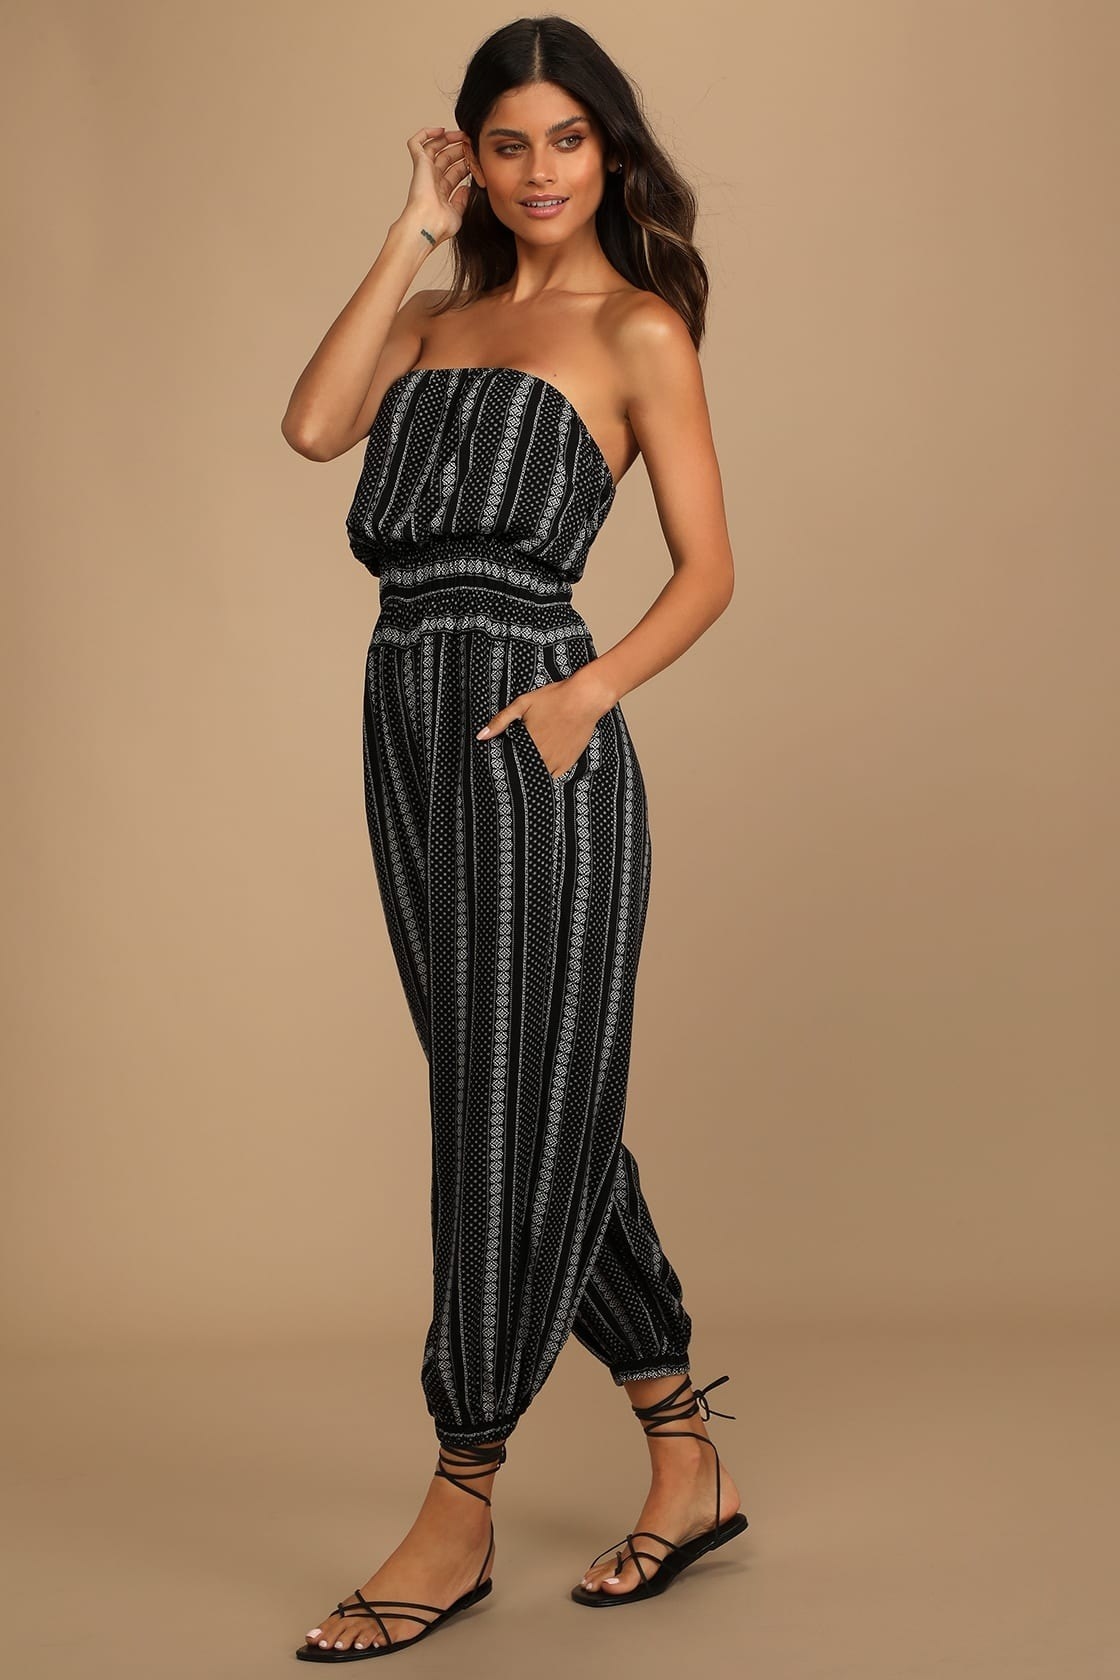 Model wearing black and white patterned tube top jumpsuit